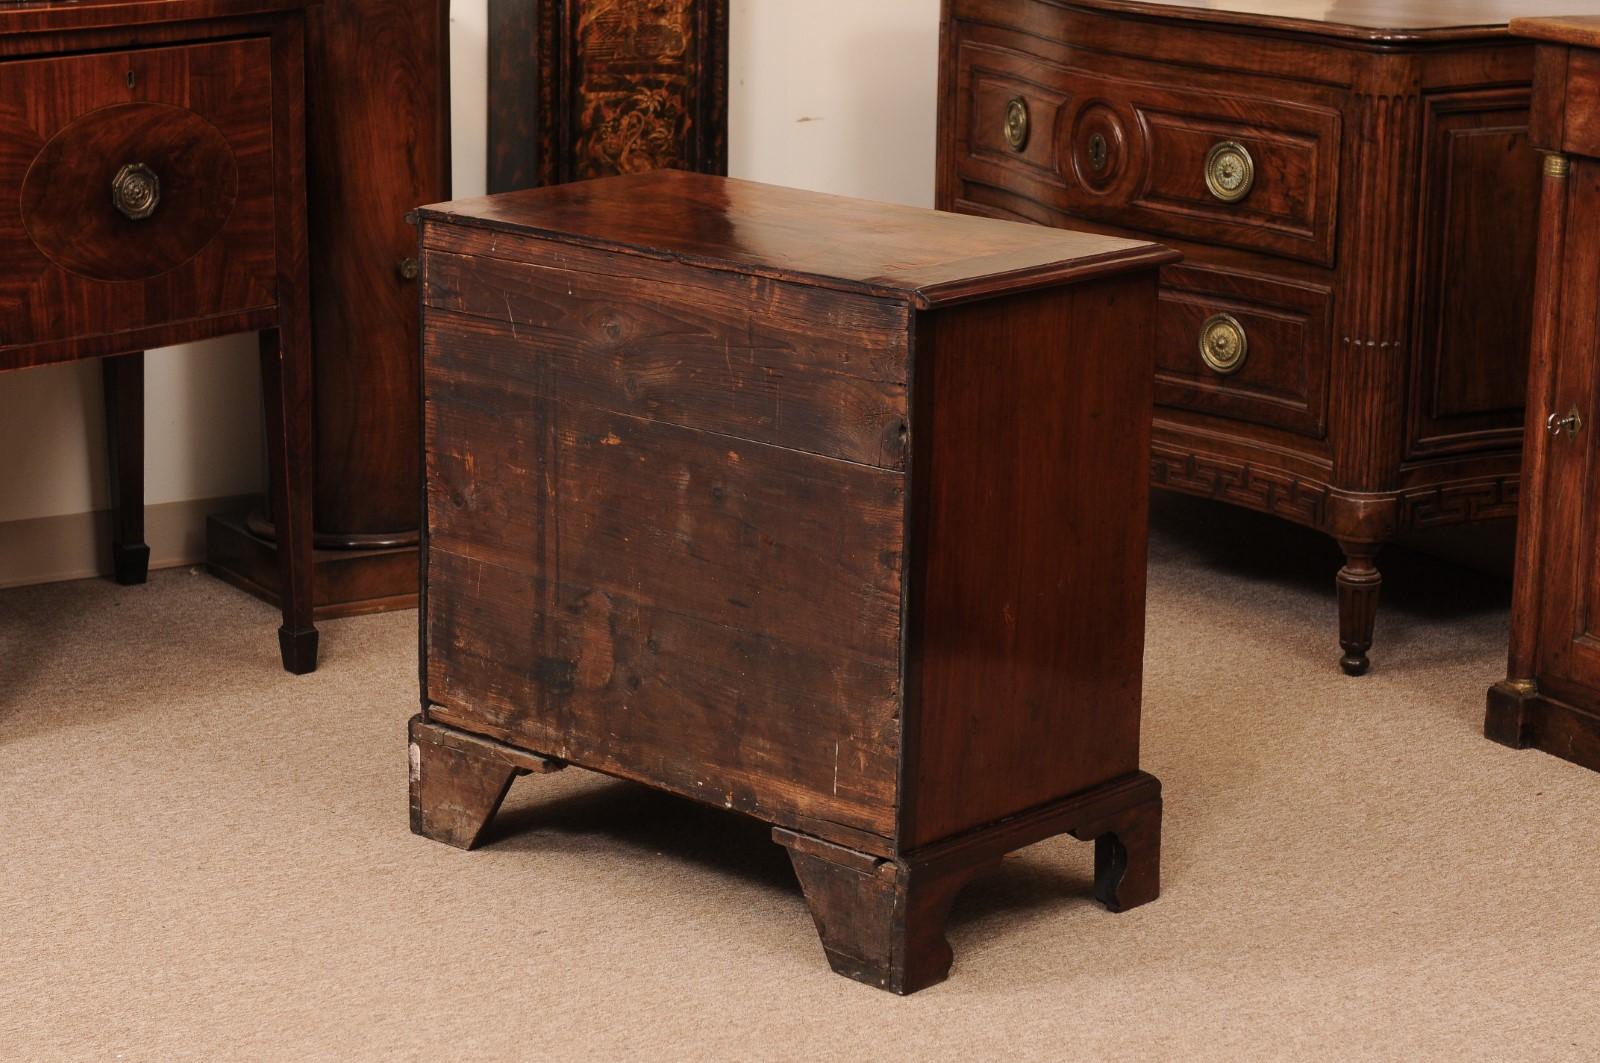 Small 18th Century English Mahogany Bachelor’s Chest with 4 Drawers and Bracket For Sale 3